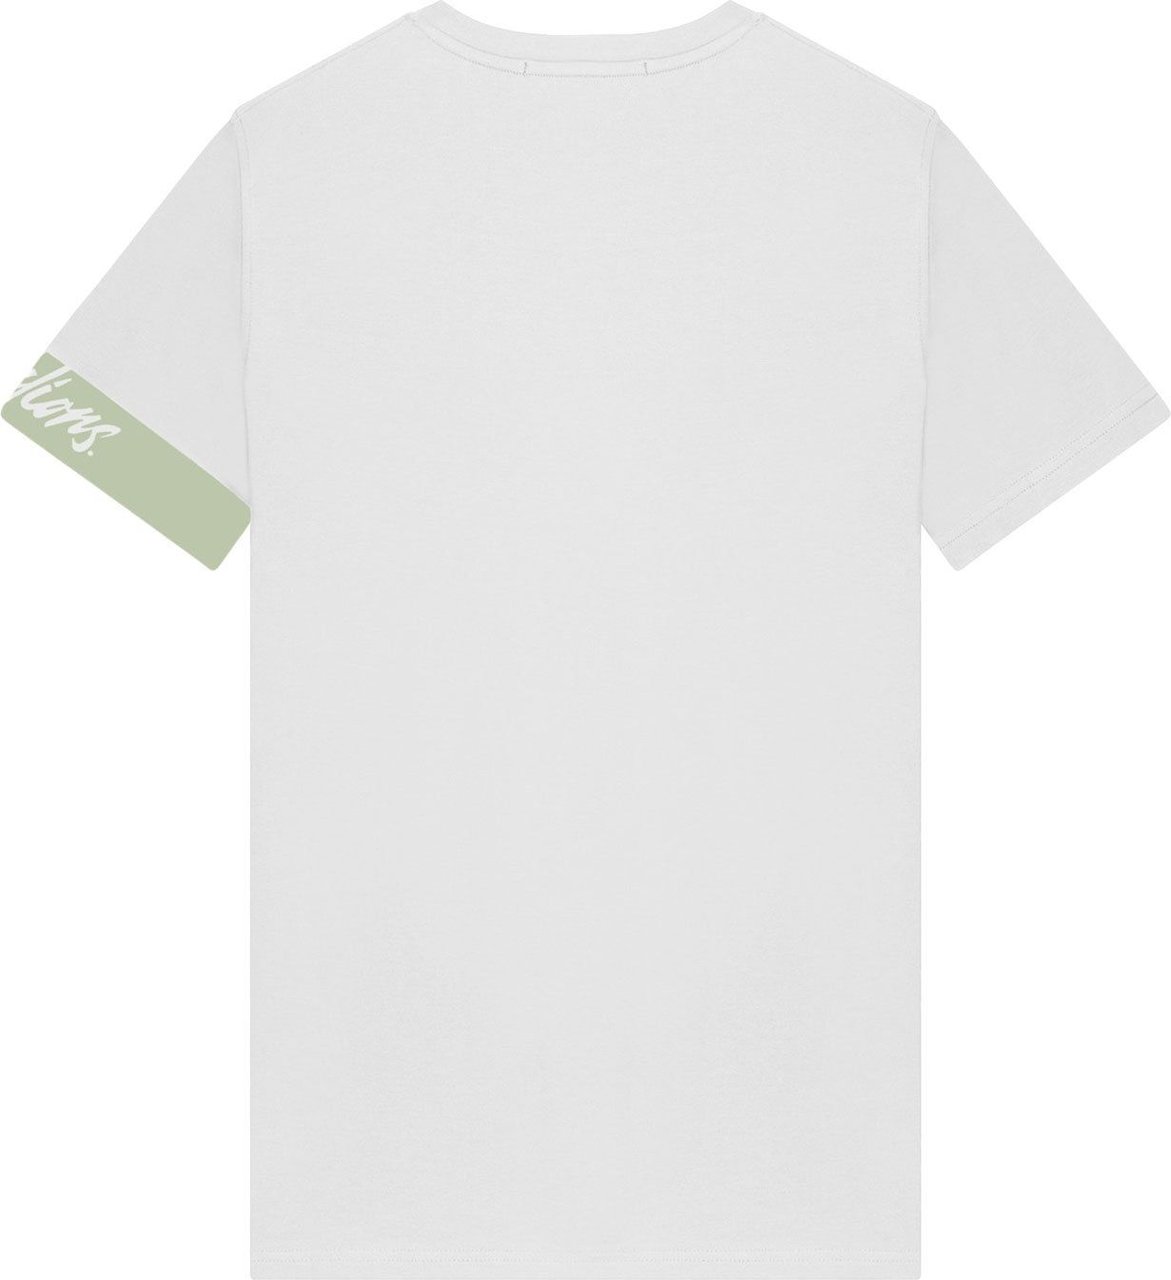 Malelions Captain T-Shirt 2- White/Green Wit